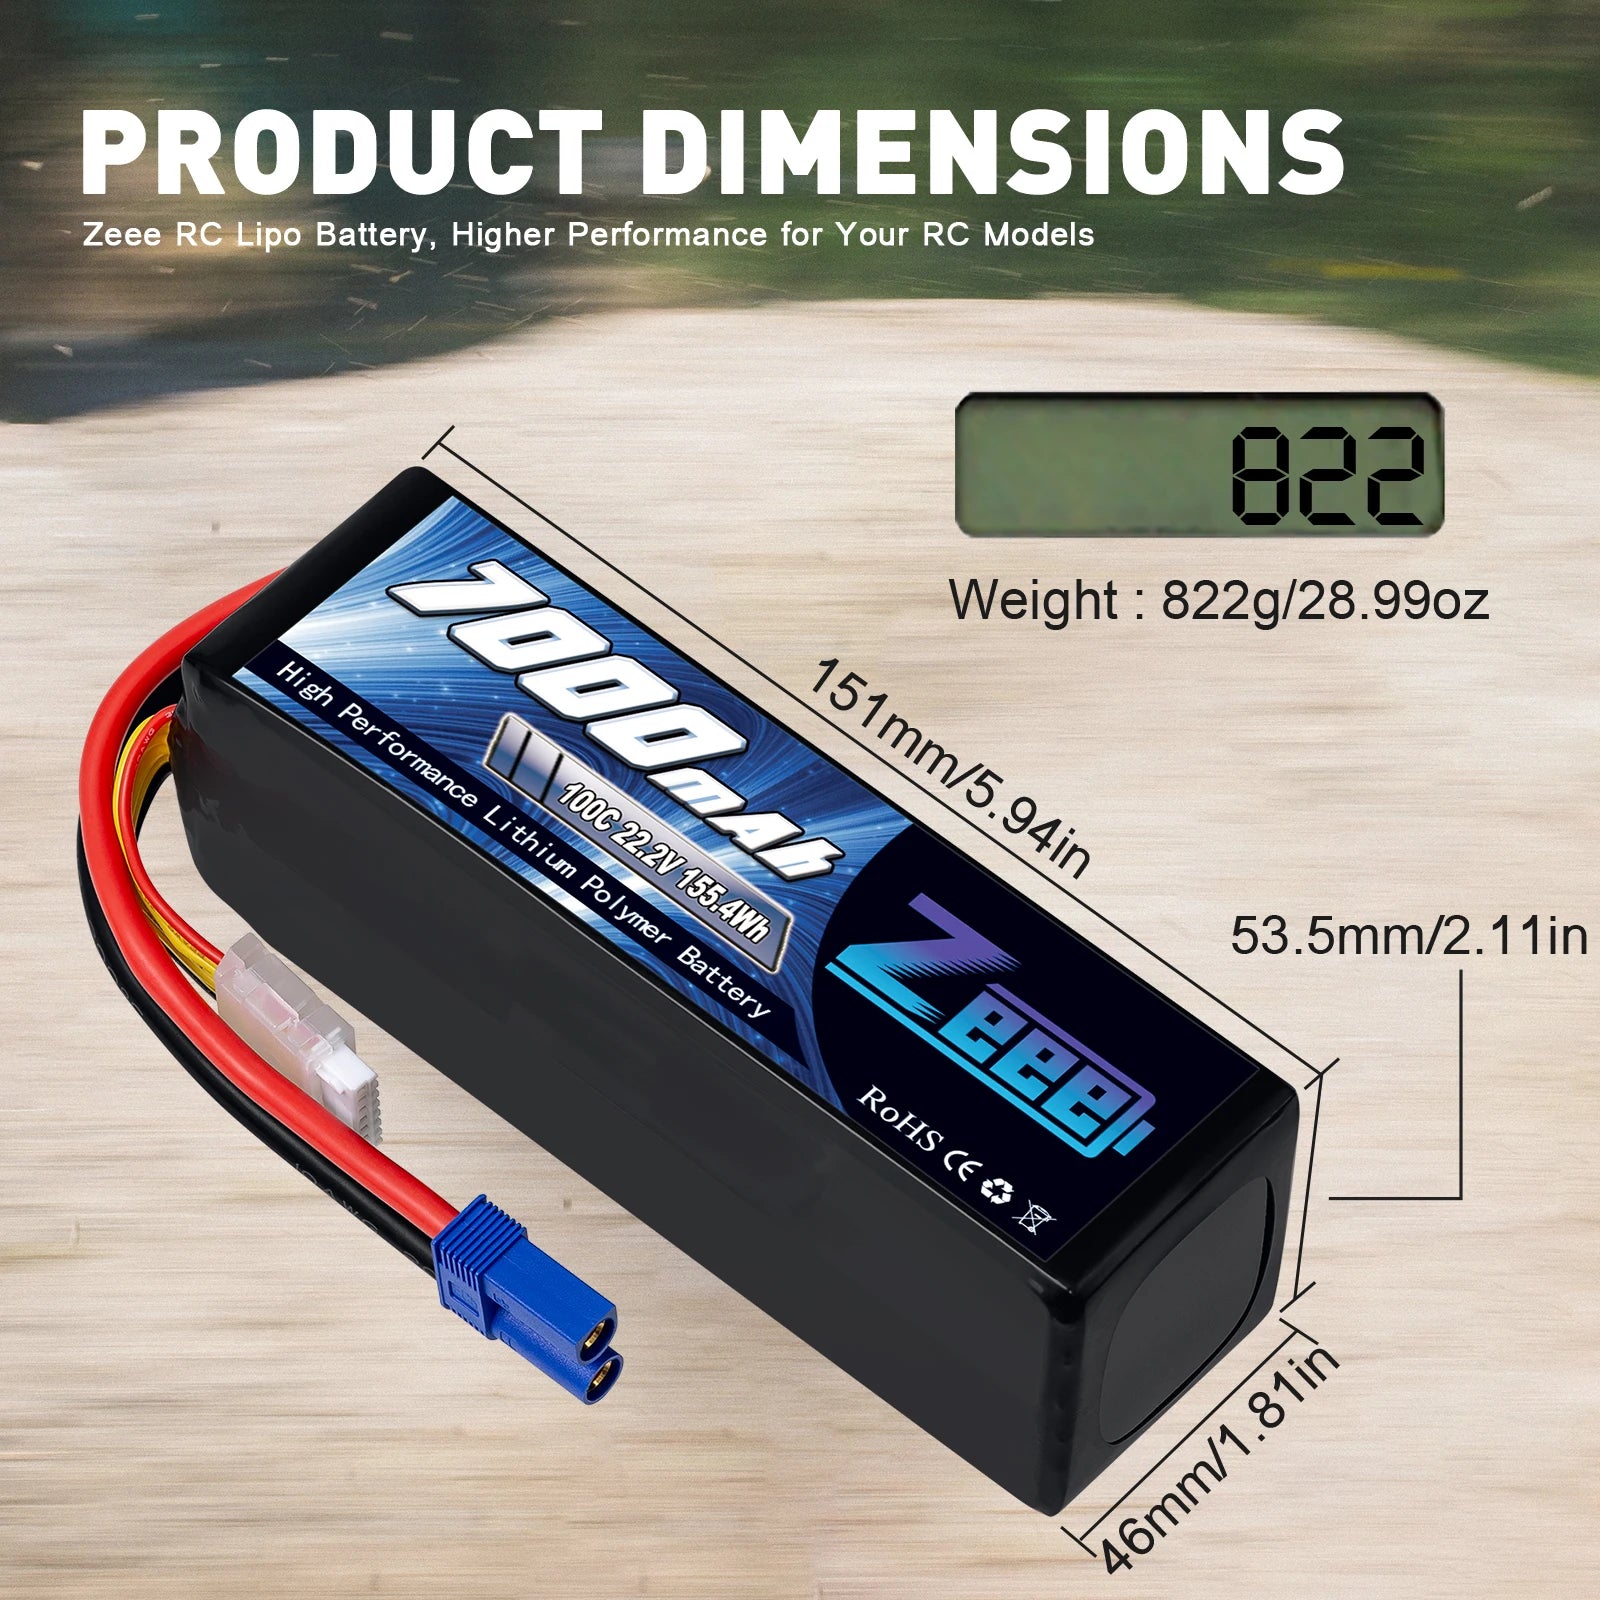 2Units Zeee Lipo Battery, Zeee RC Lipo Battery, Higher Performance for Your RC Models 822